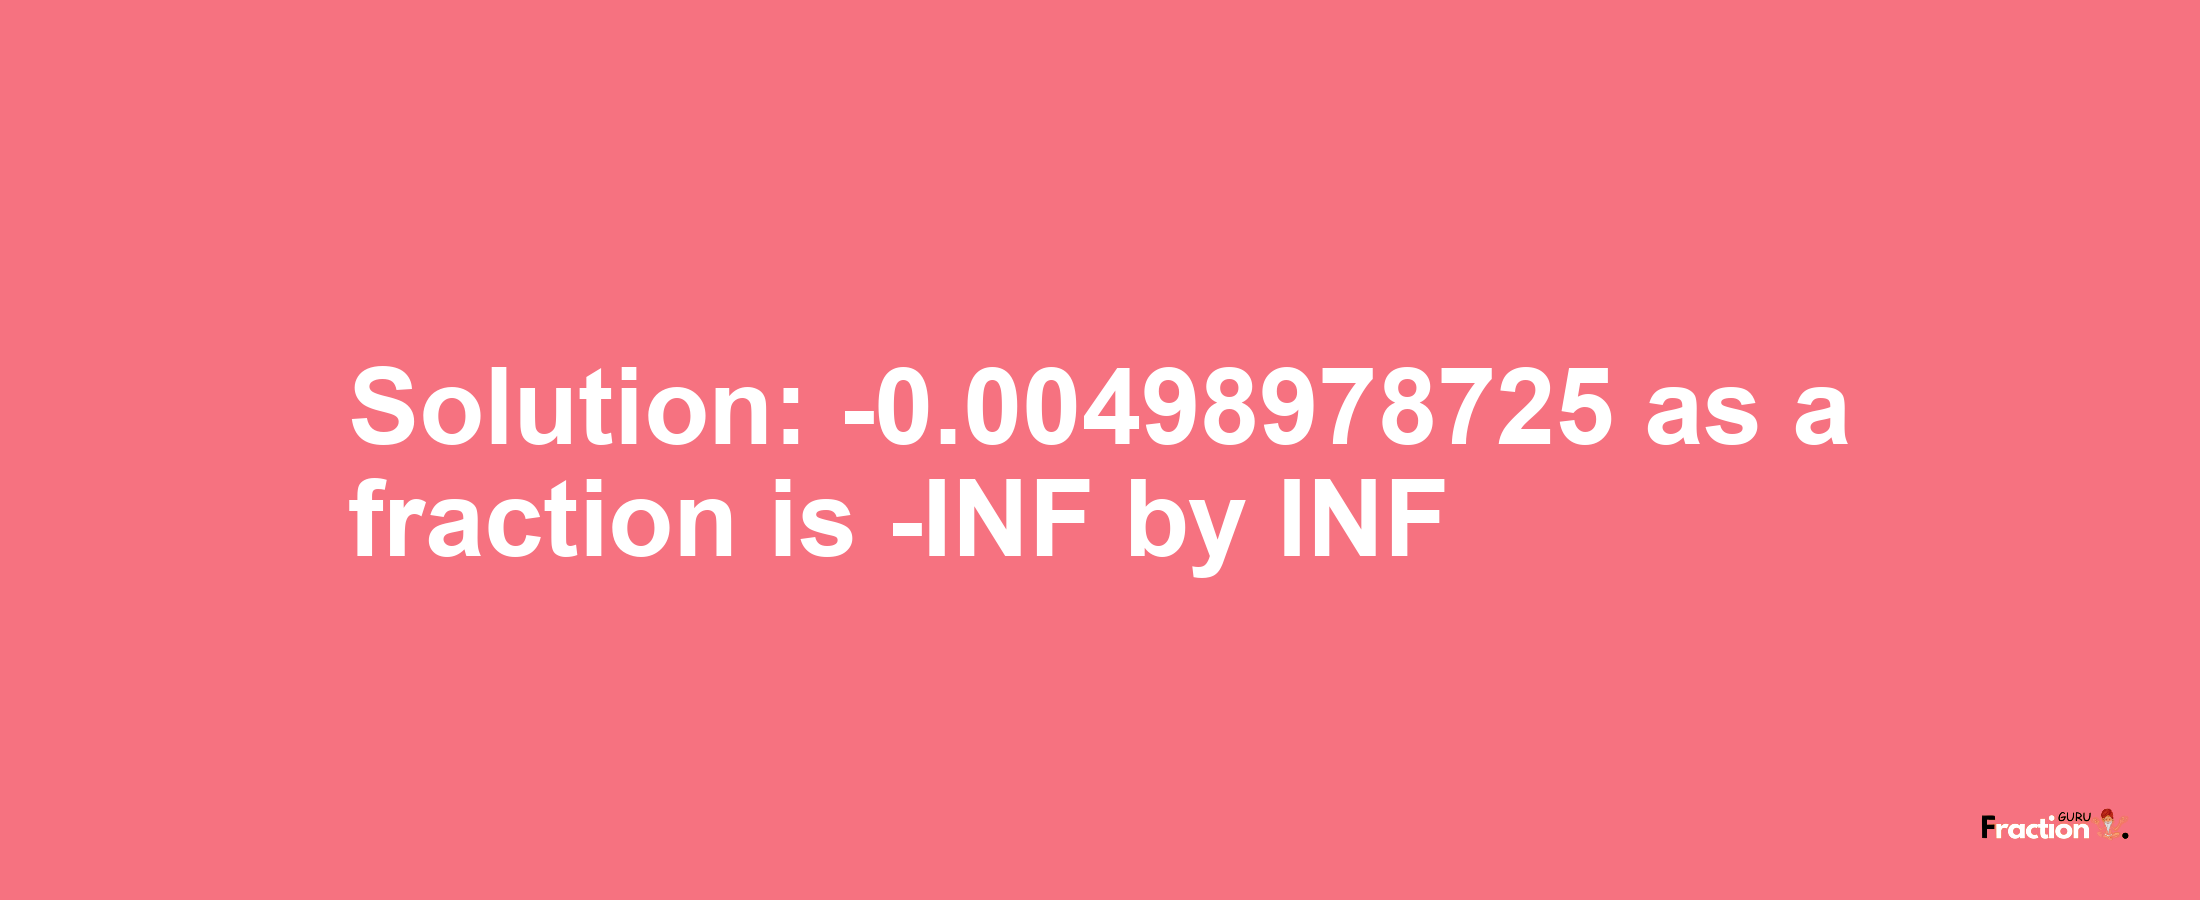 Solution:-0.00498978725 as a fraction is -INF/INF